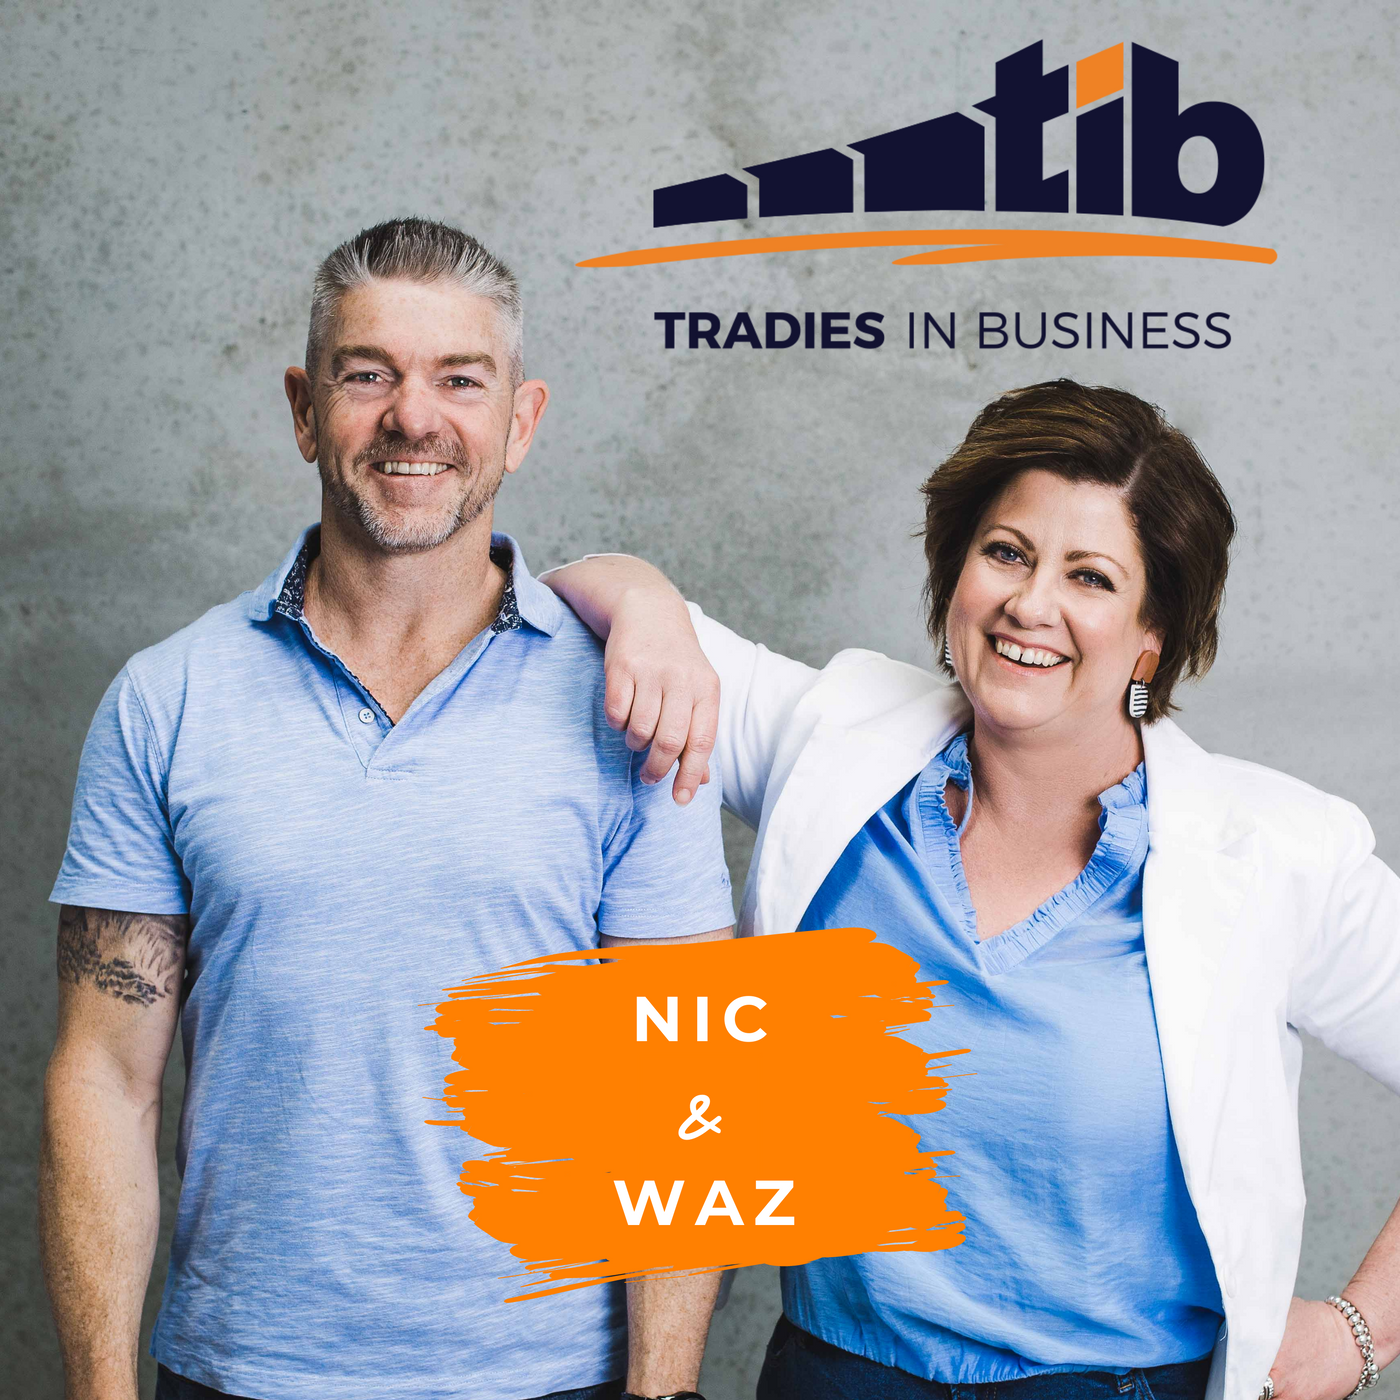 TIB586 Real Tradie Guys - Steve Rooney Shares His Stories of Broken Partnerships, Wearing Lycra and How To Get Better At Stuff